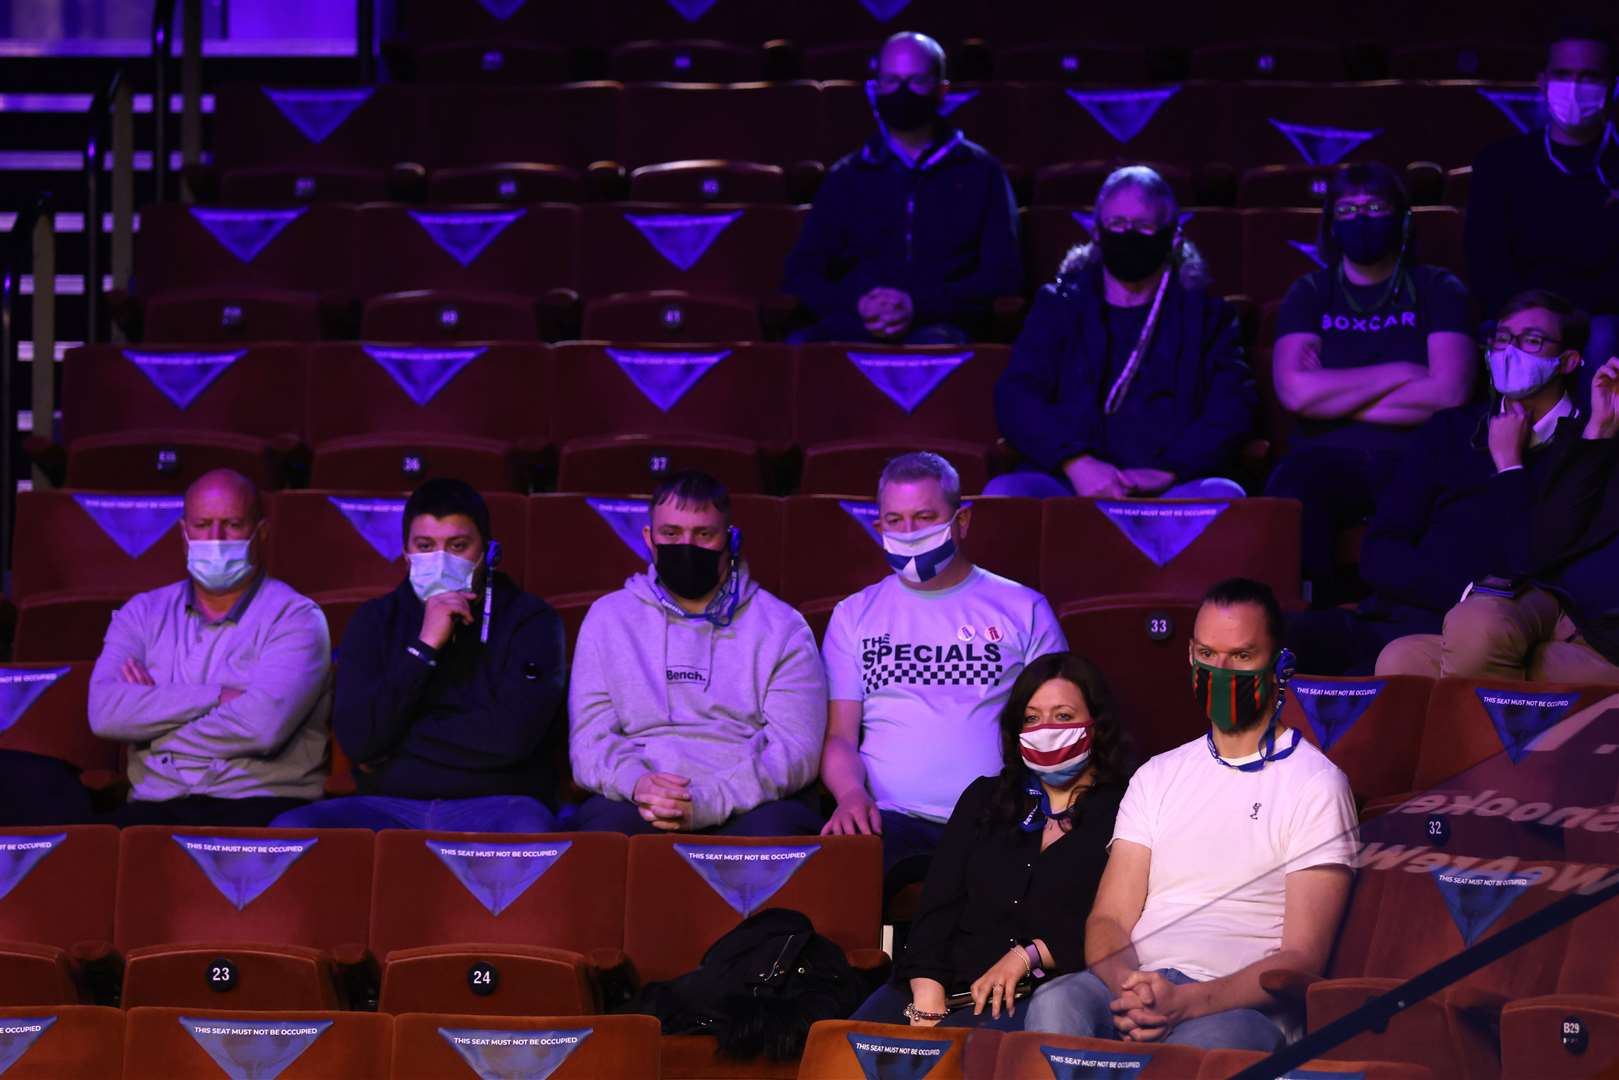 Spectators wearing face masks during Saturday’s Betfred World Snooker Championships at The Crucible, Sheffield (George Wood/PA)